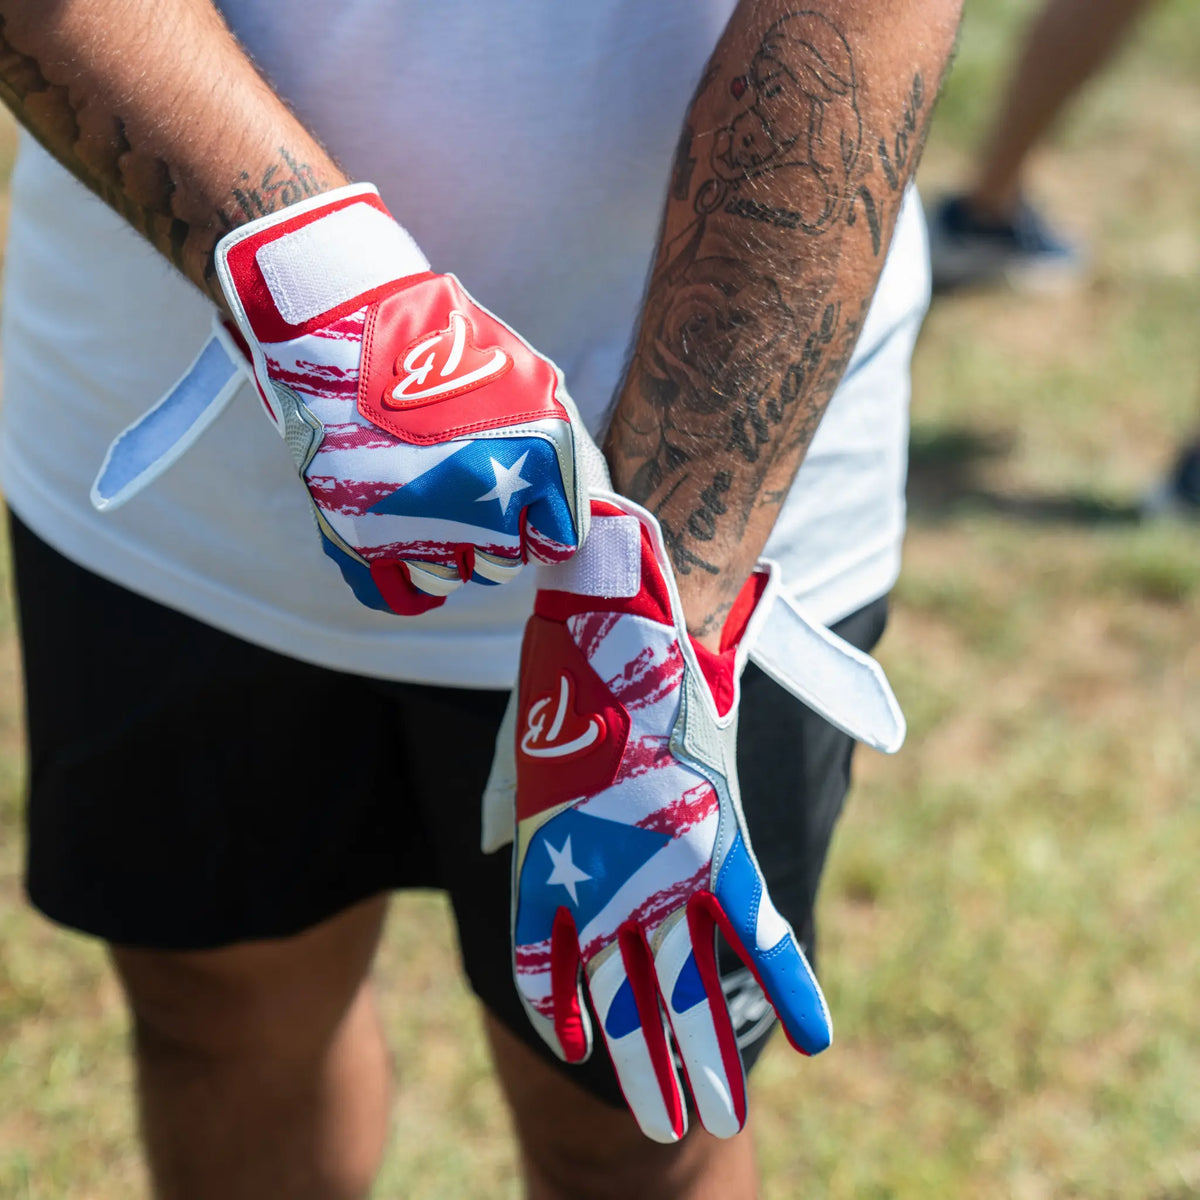 Baseball player gearing up with premium Tater batting gloves featuring a bold Puerto Rican flag design, a symbol of pride and performance on the diamond.